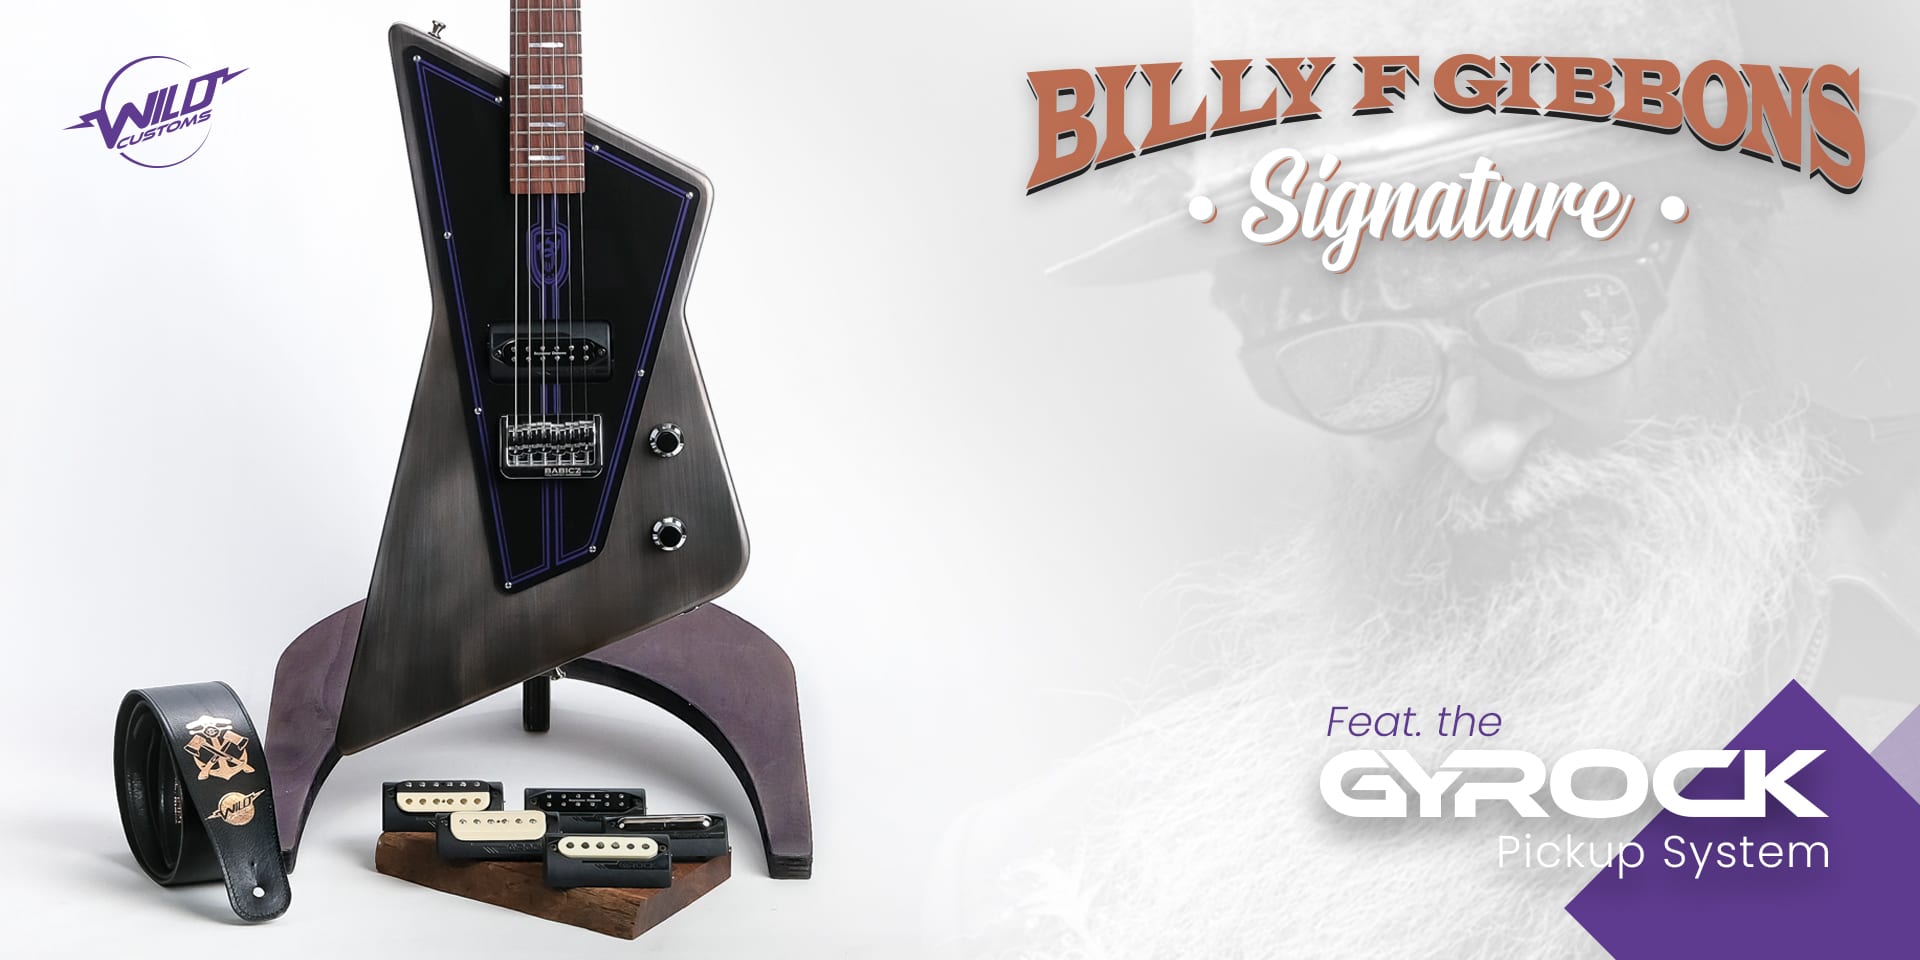 Wild Customs Billy F Gibbons Special